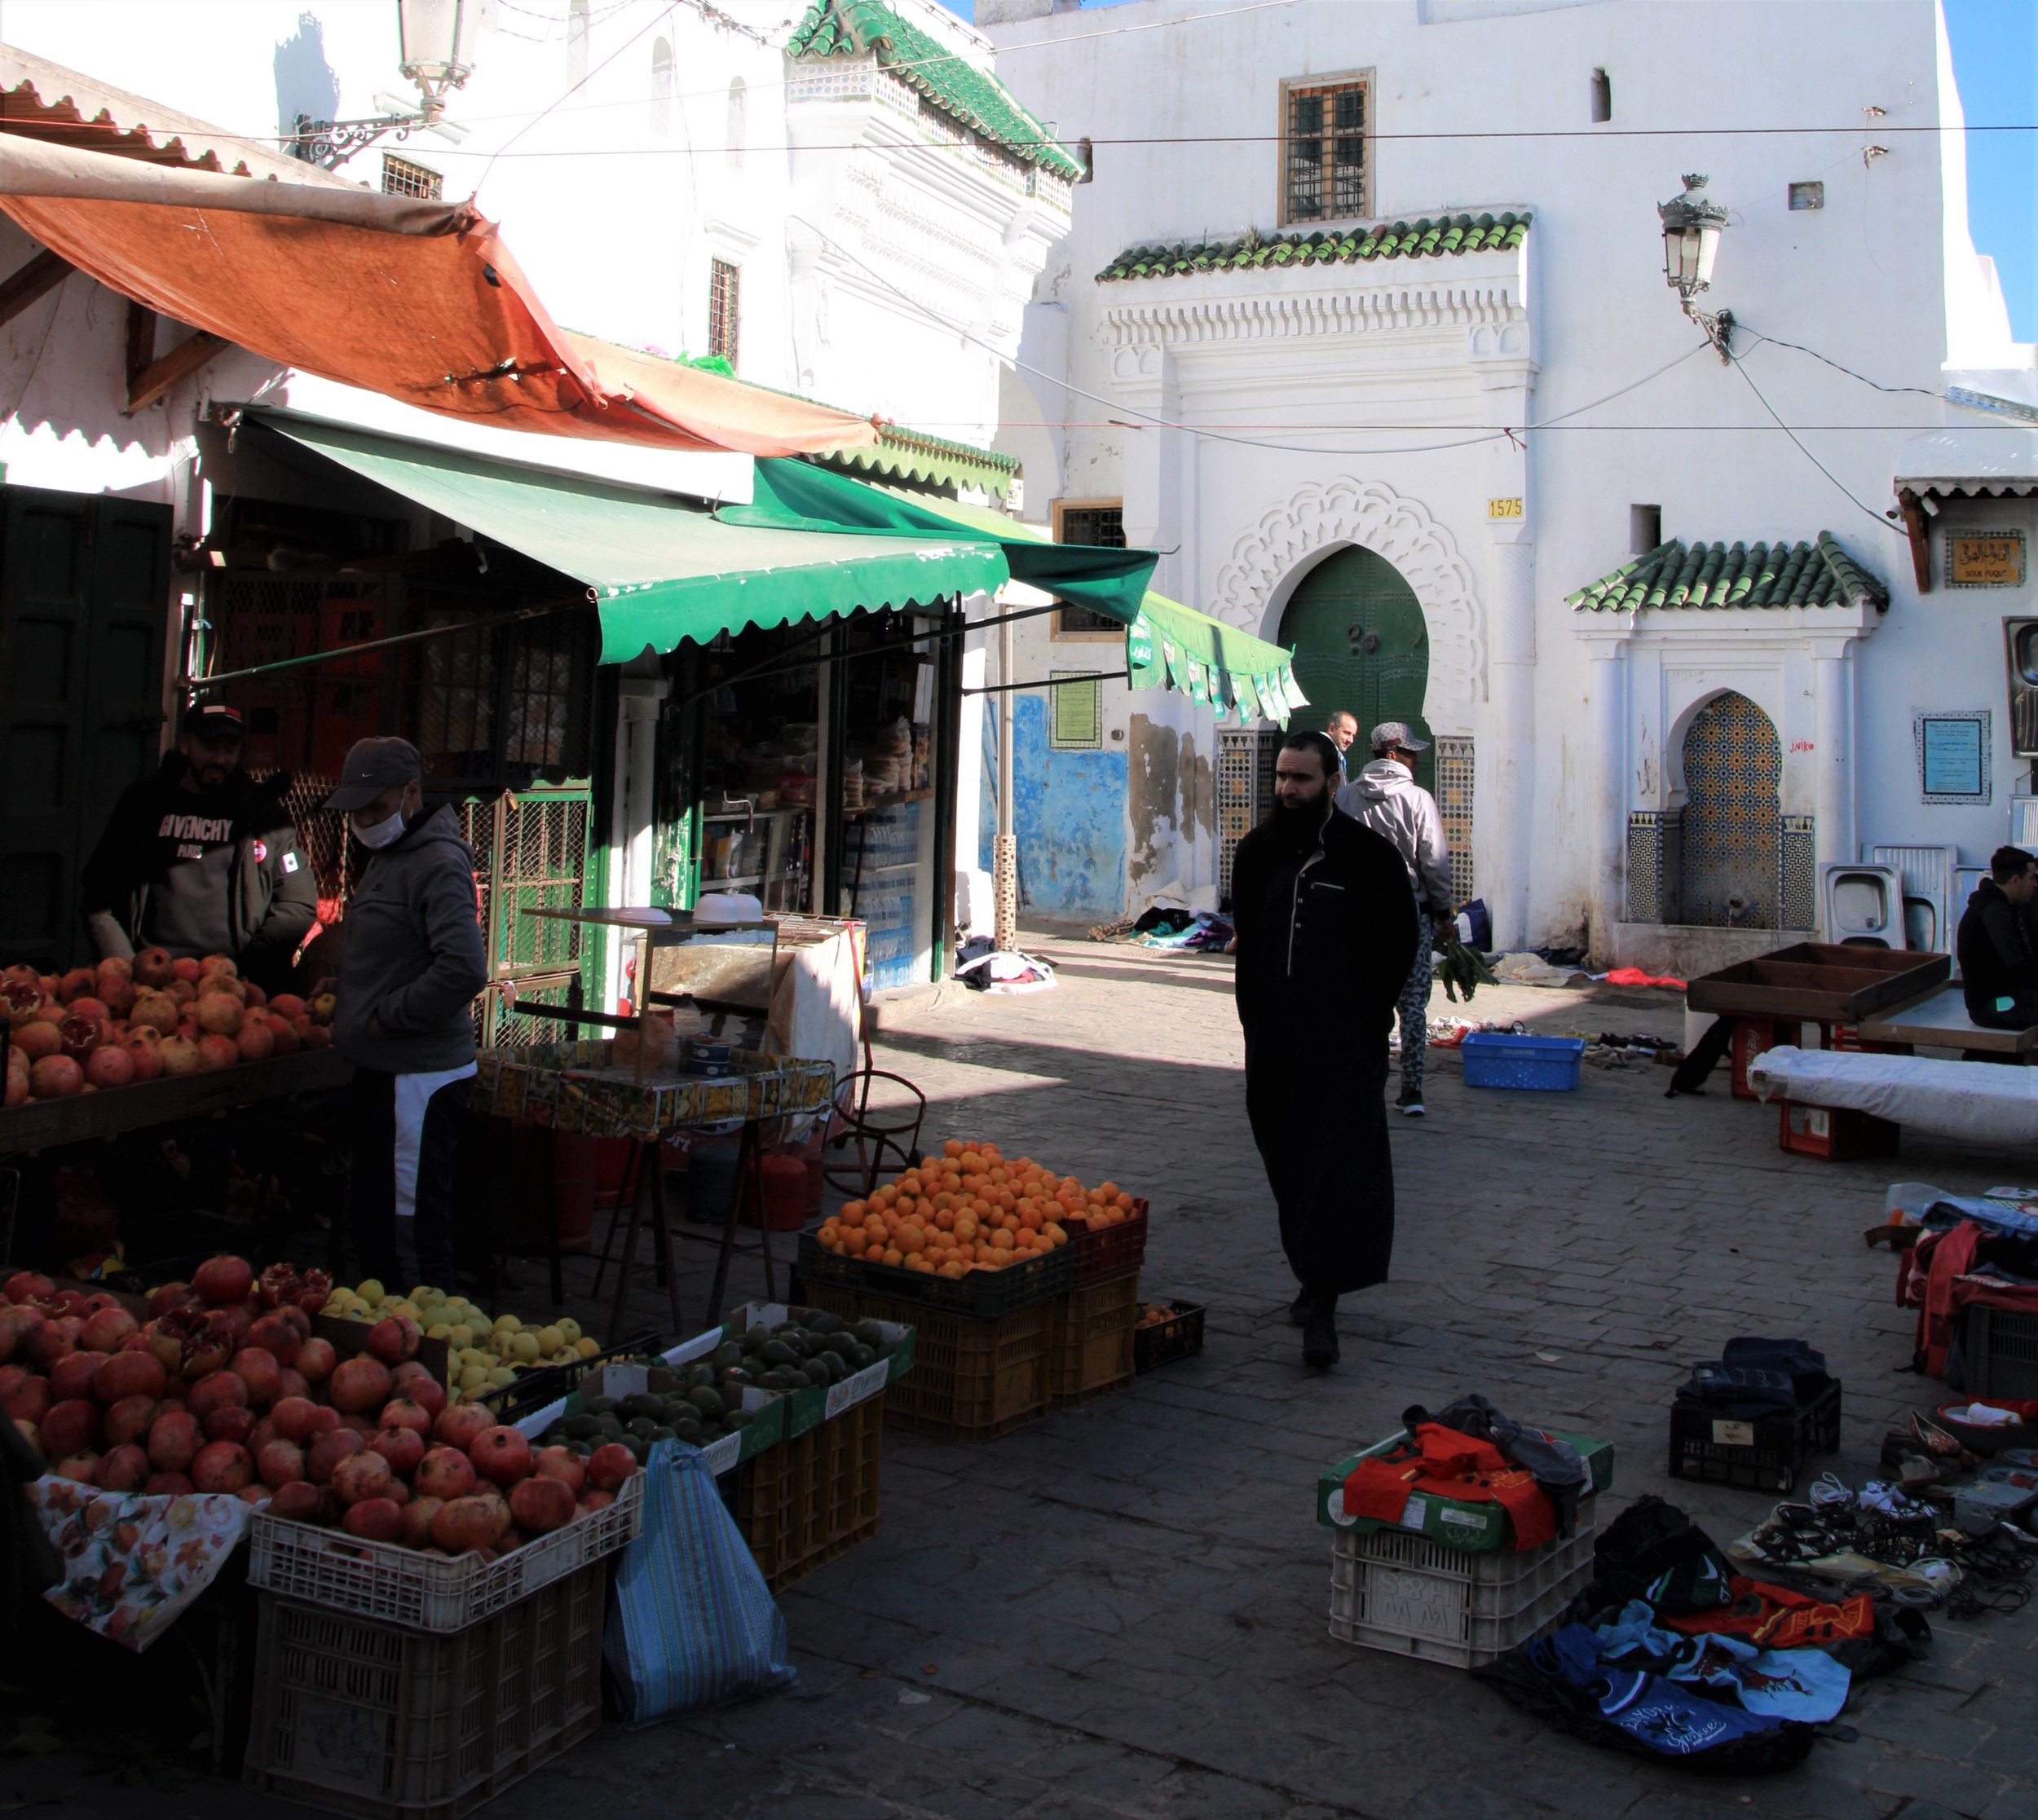  PICTURED: A man in a Jebala walks in front of one of the 17th century mosques in the old medina. PC: Andrew Corbley © 